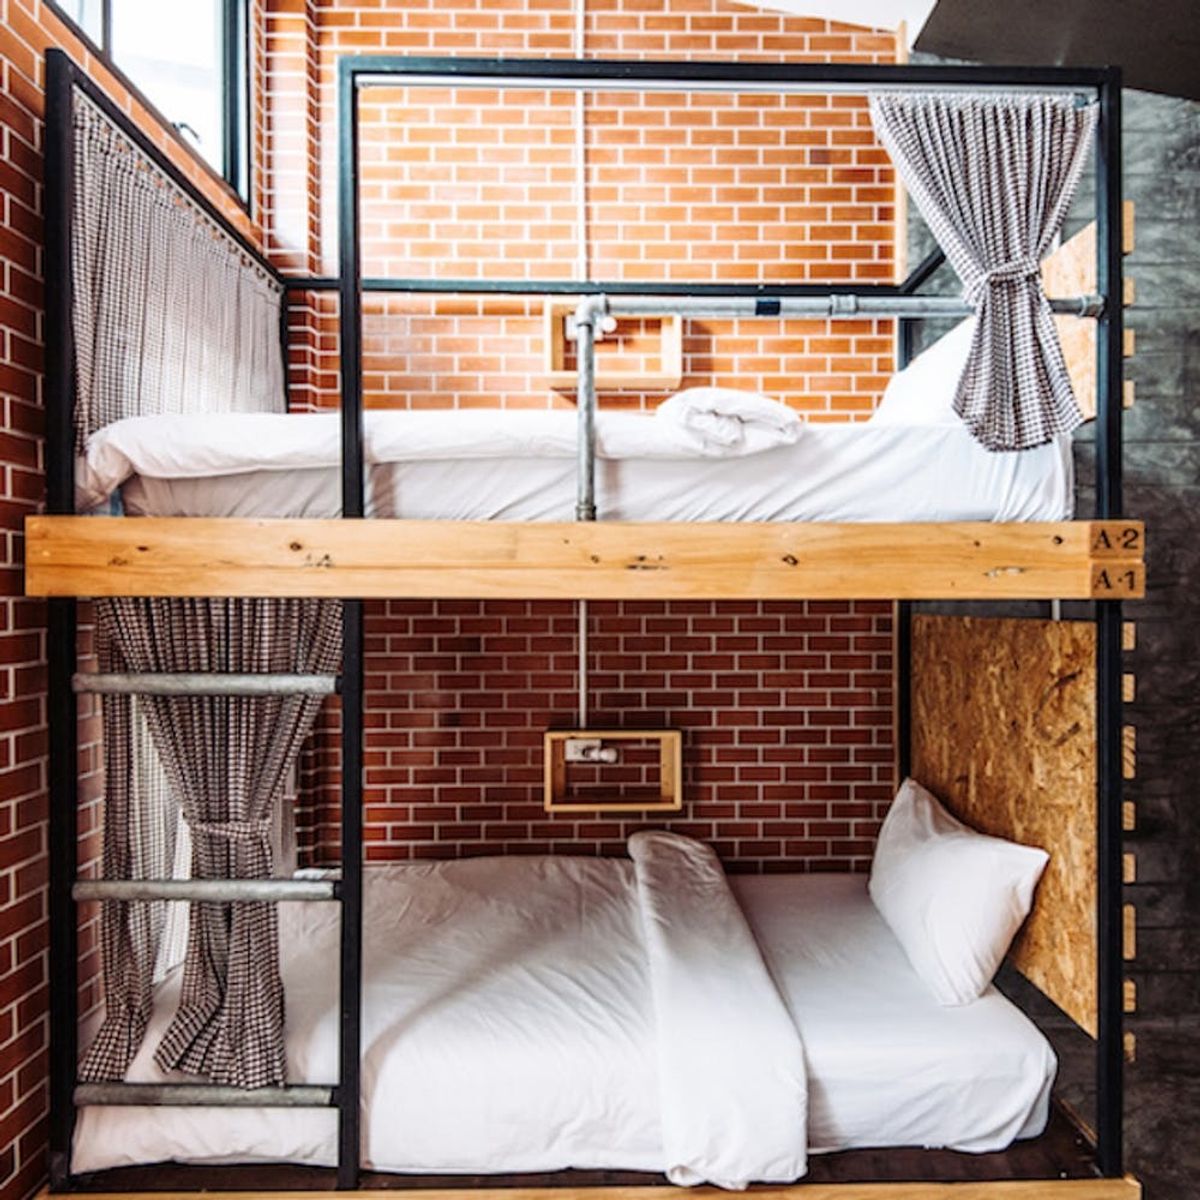 Slam Bunk! Here Are the 12 Best Double Decker Sleepers Ideas Ever